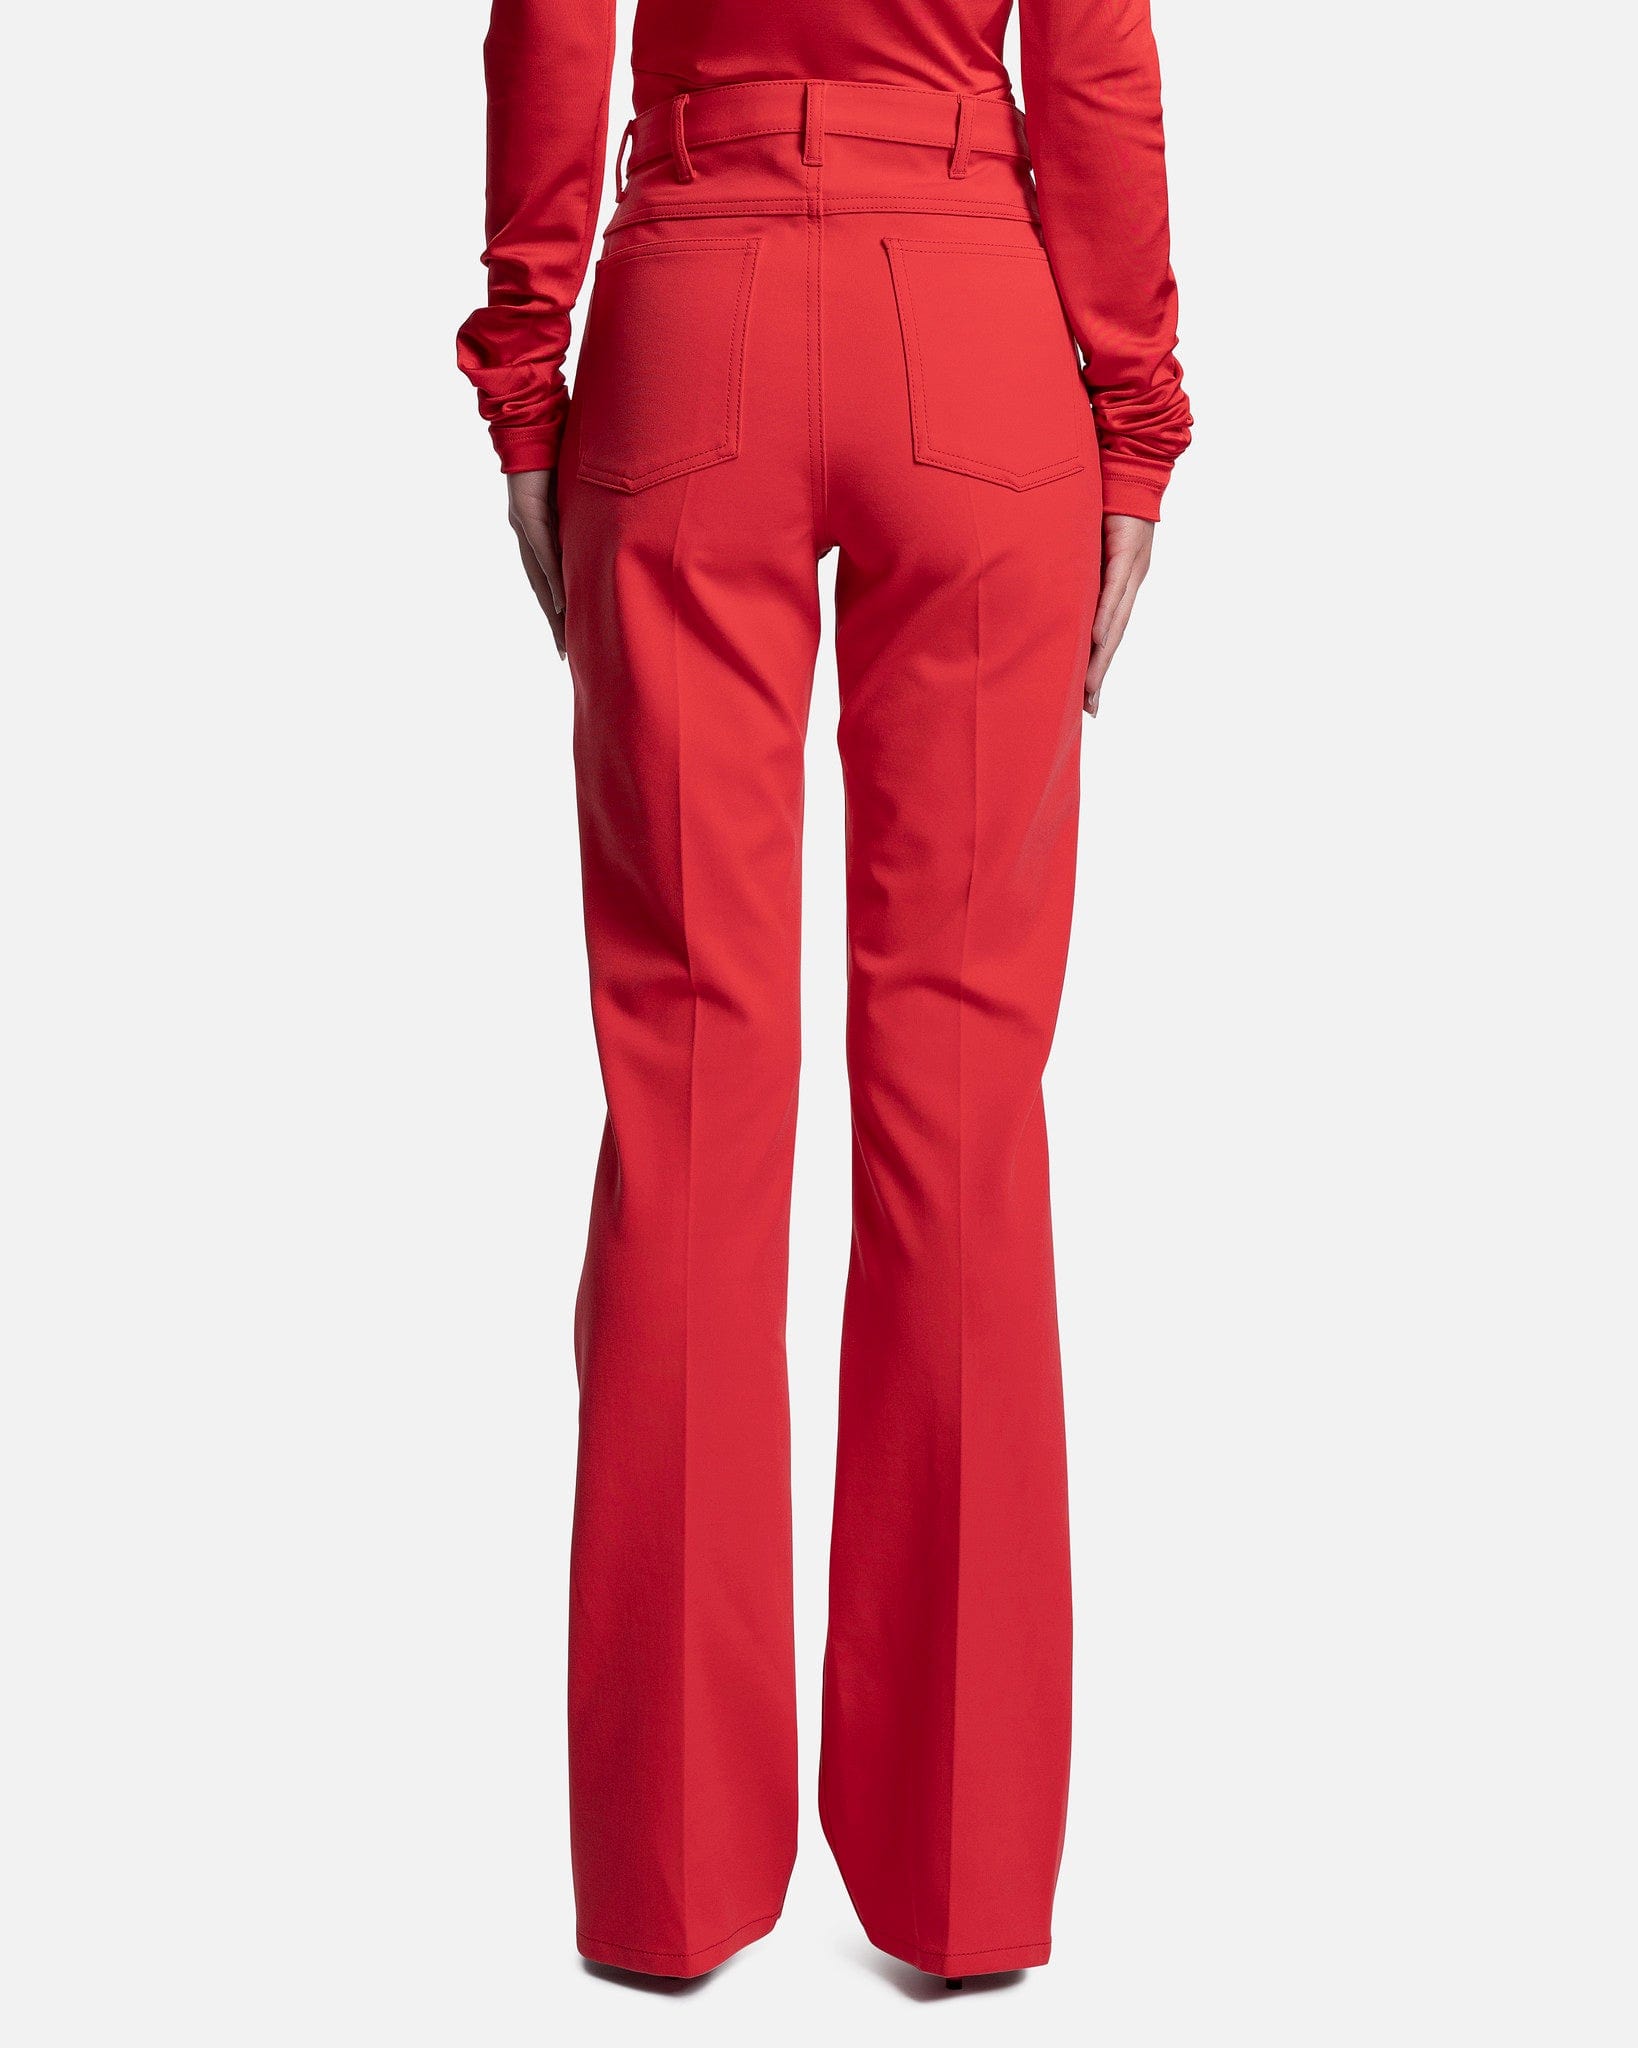 Marni Women Pants Compact Viscose Jersey Trousers in Lacquer